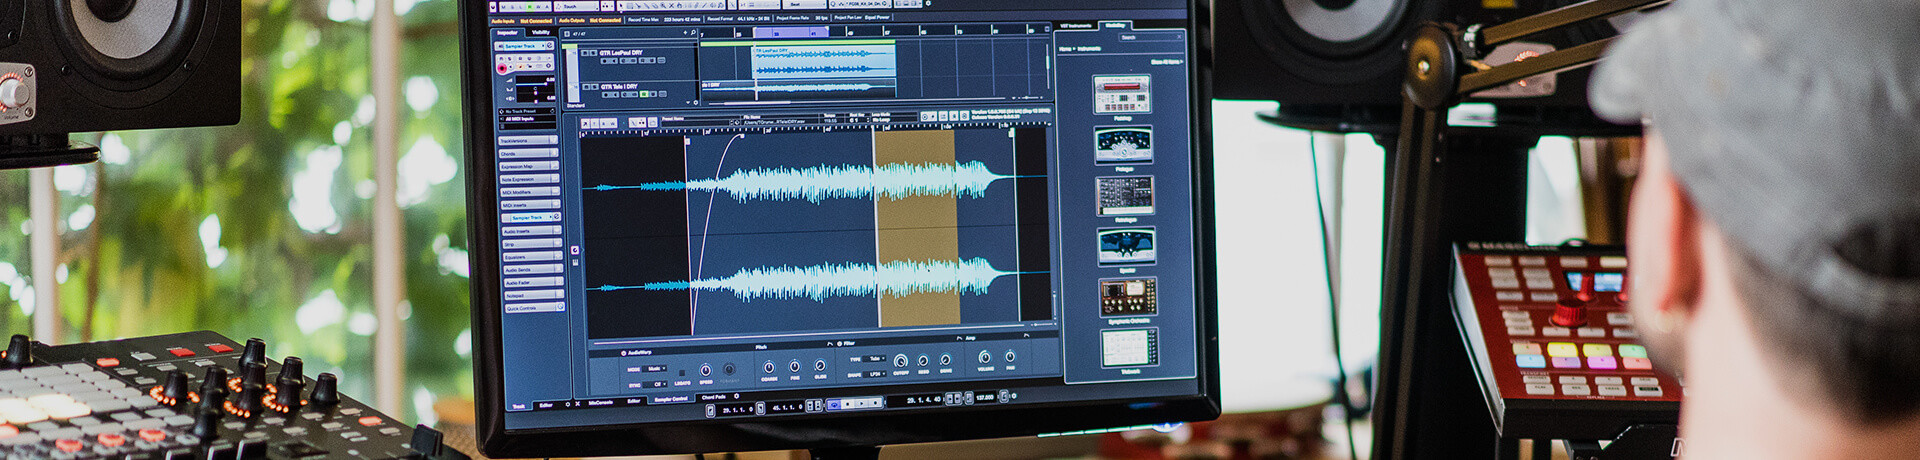 Steinberg unveils Cubase PRO 9 and also the siblings, Cubase Artist 9 and Cubase Elements 9